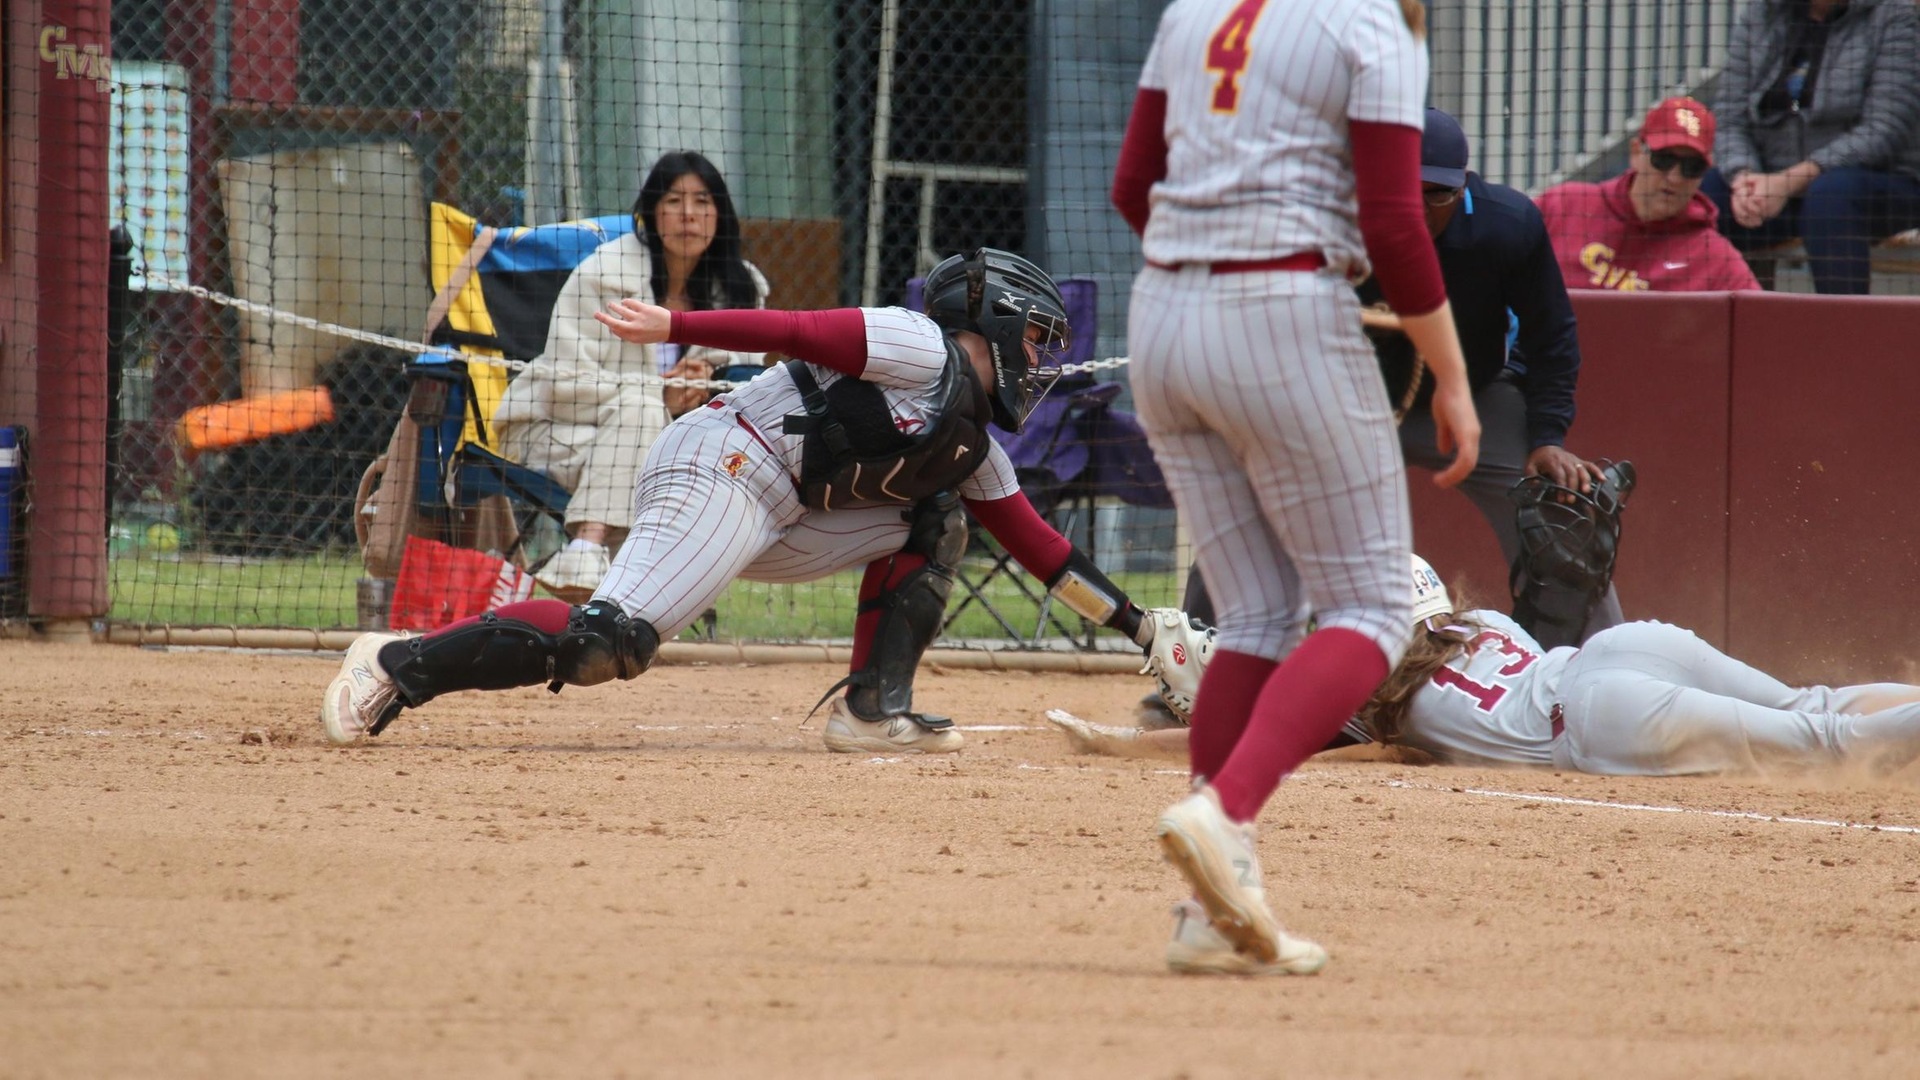 Sarah Loper tags out a run at the plate in the nightcap (photo by Eva Fernandez)